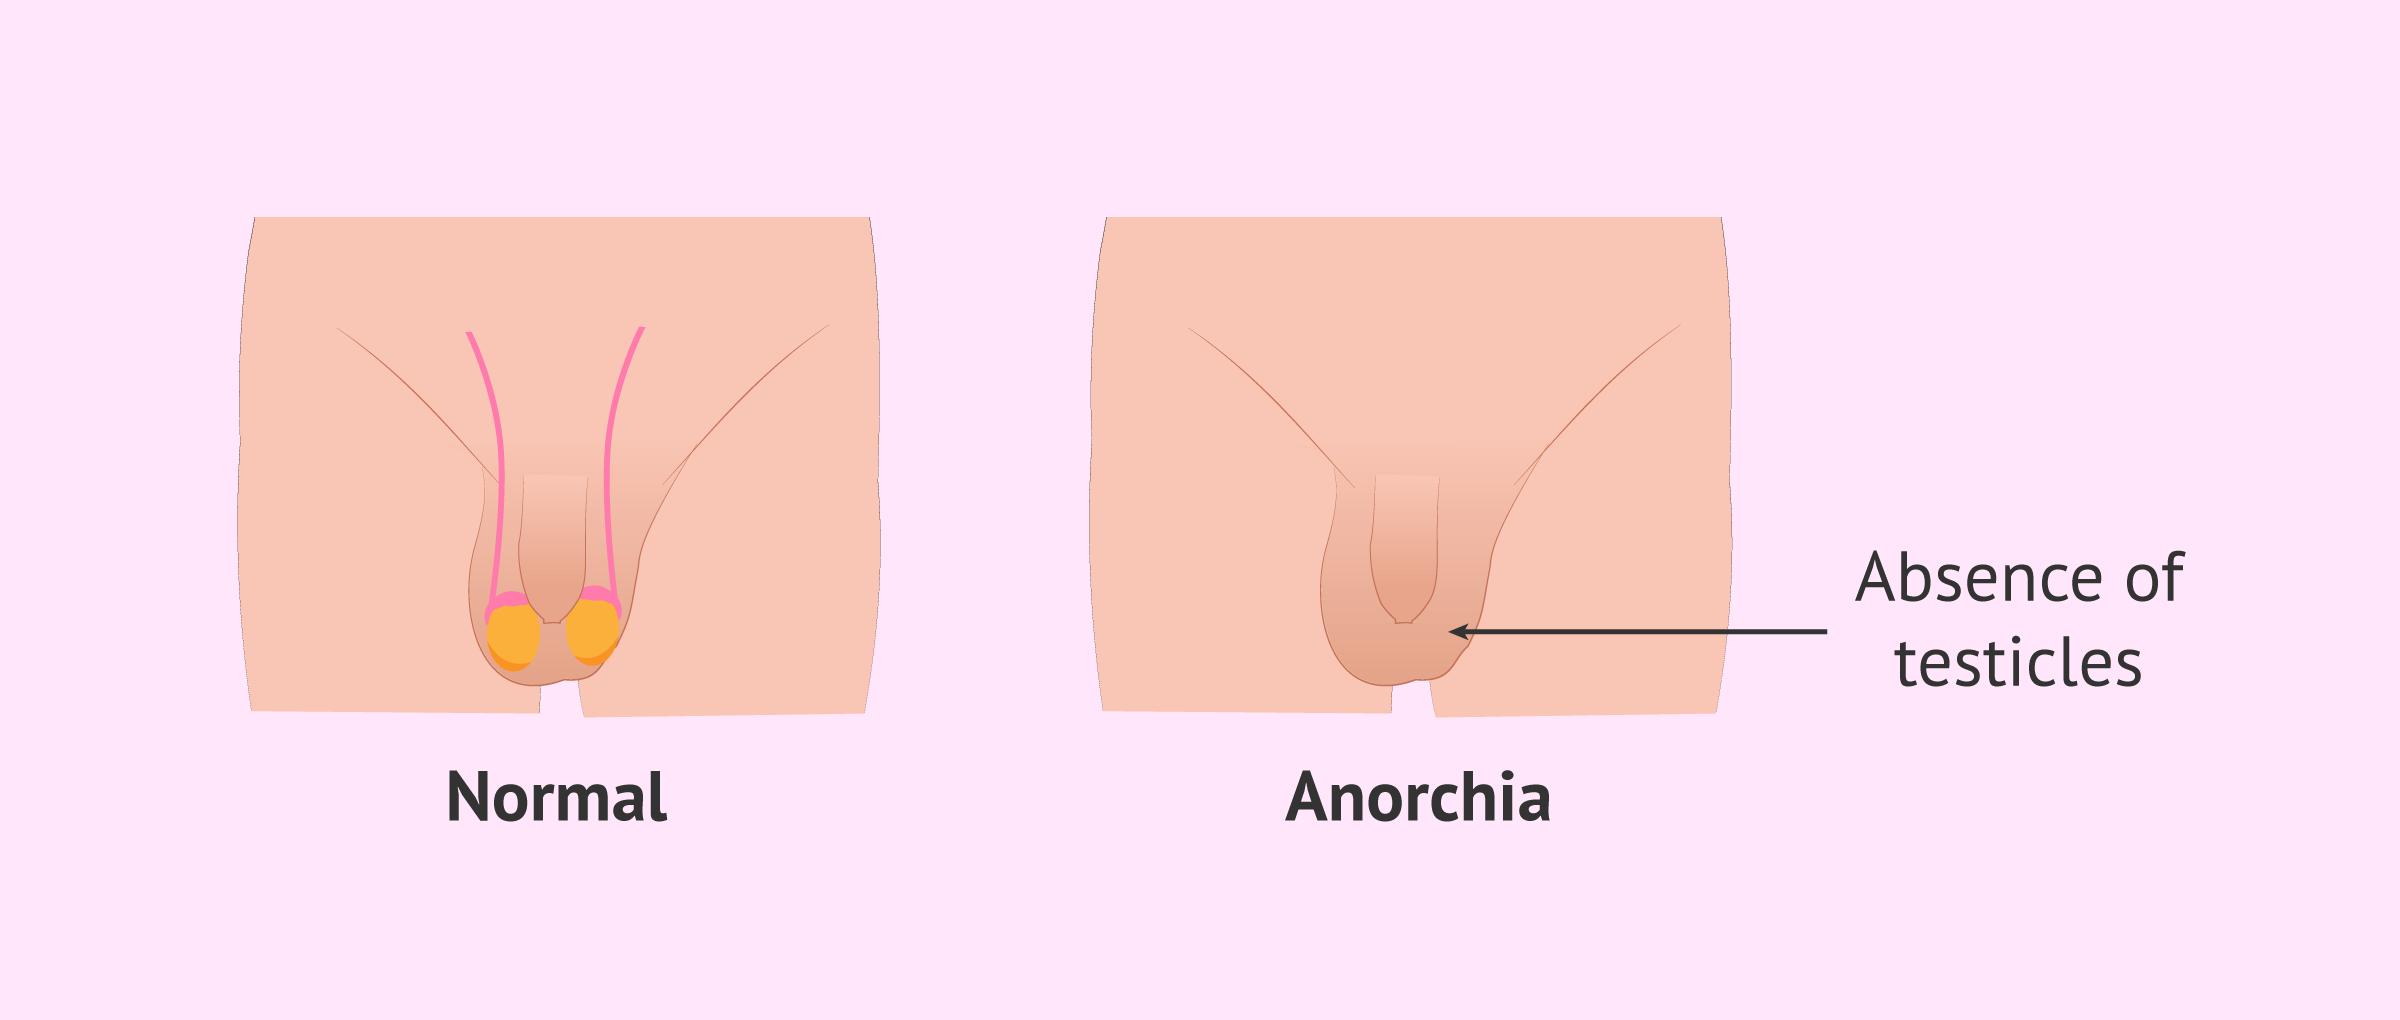 anorchia-absence-testicles